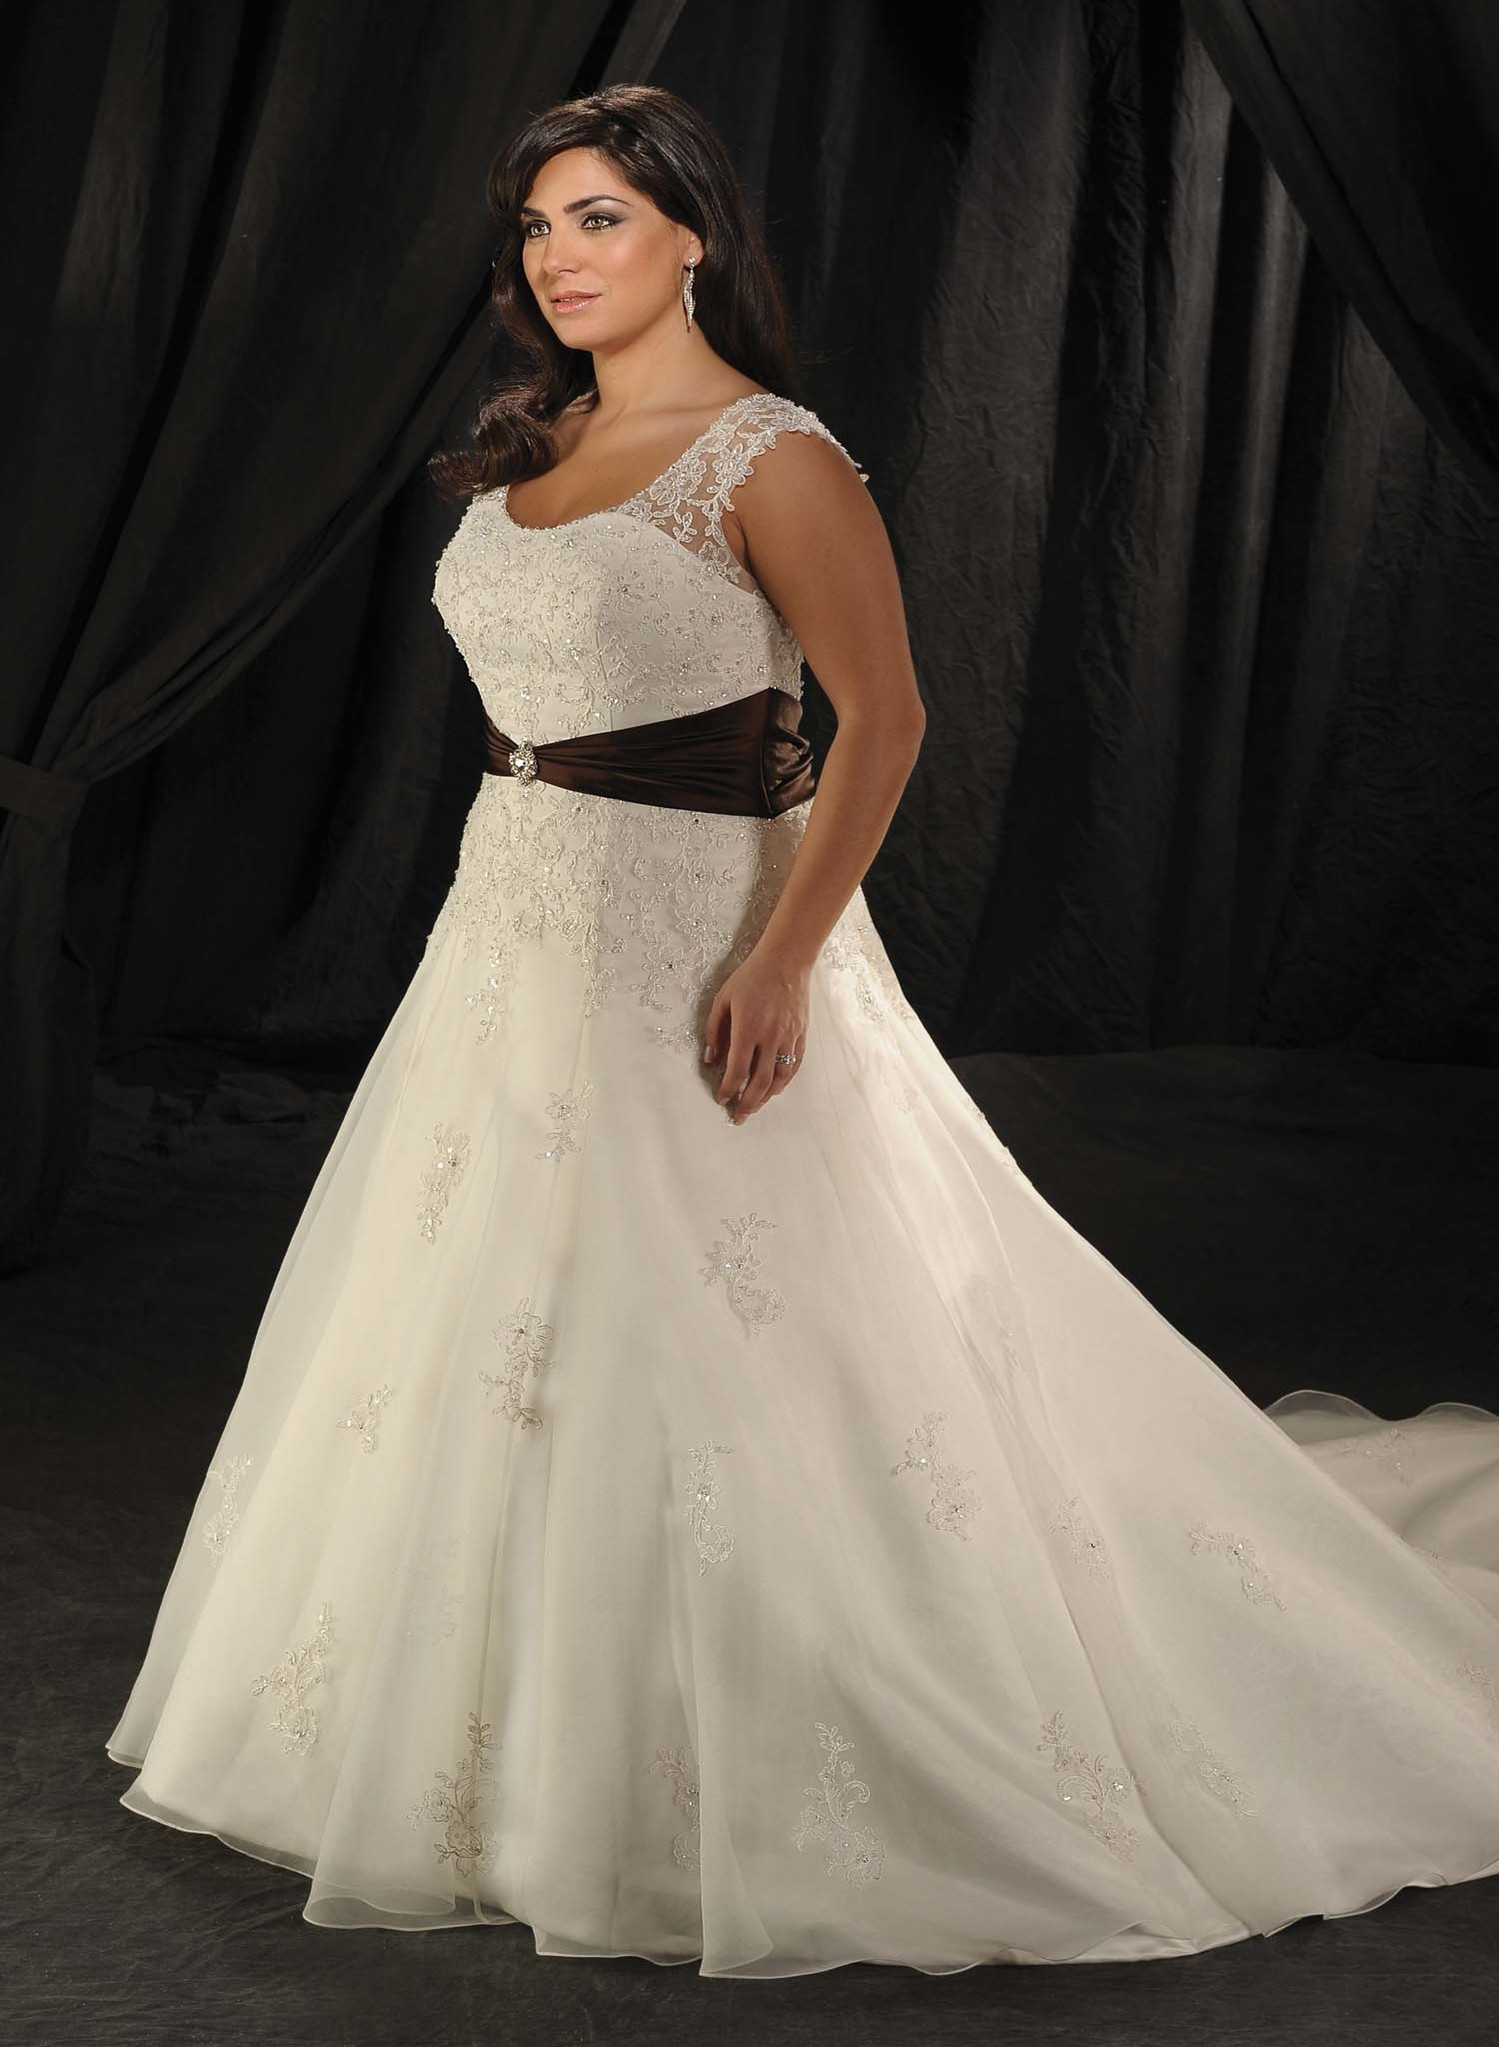 Plus Size Wedding Gowns Cheap
 The Wedding Dress Guide for Full figured Brides